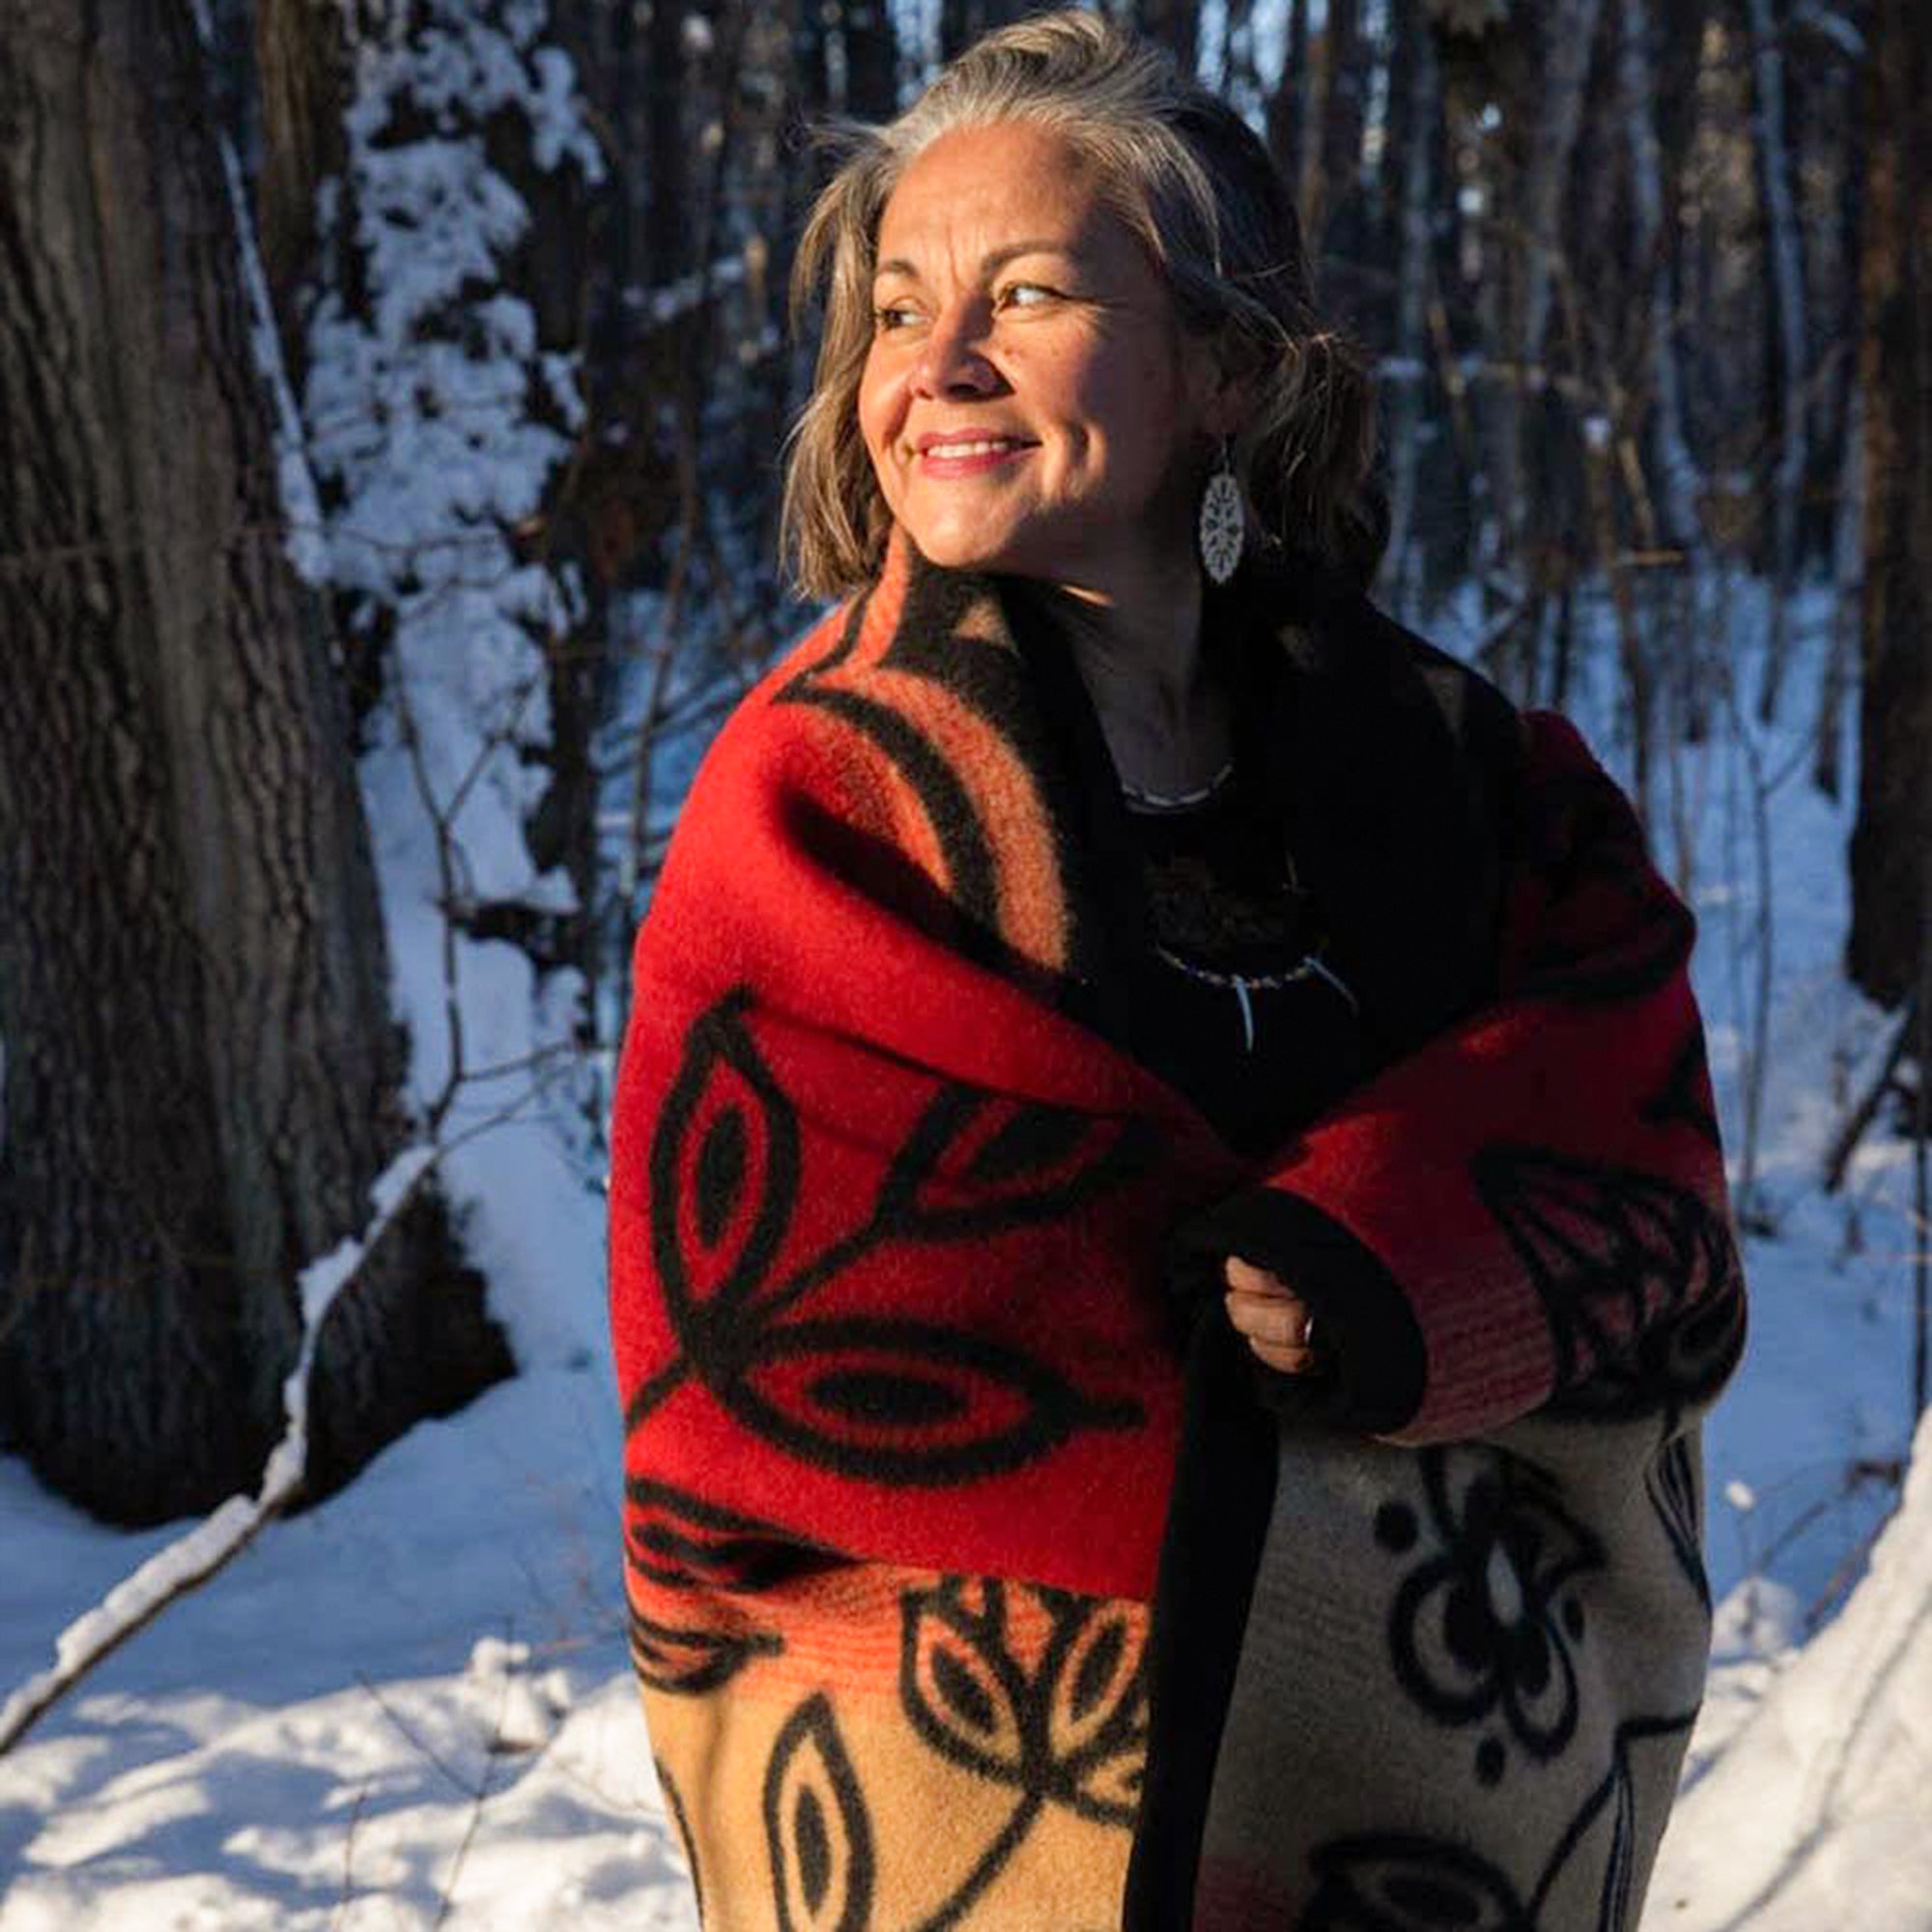 Anishinaabe-arts-entrepreneur-Sarah-Agaton-Howes-stands-in-snow-wrapped-in-black-and-red-renewal-wool-blanket-and-oval-floral-birch-bloom-earrings